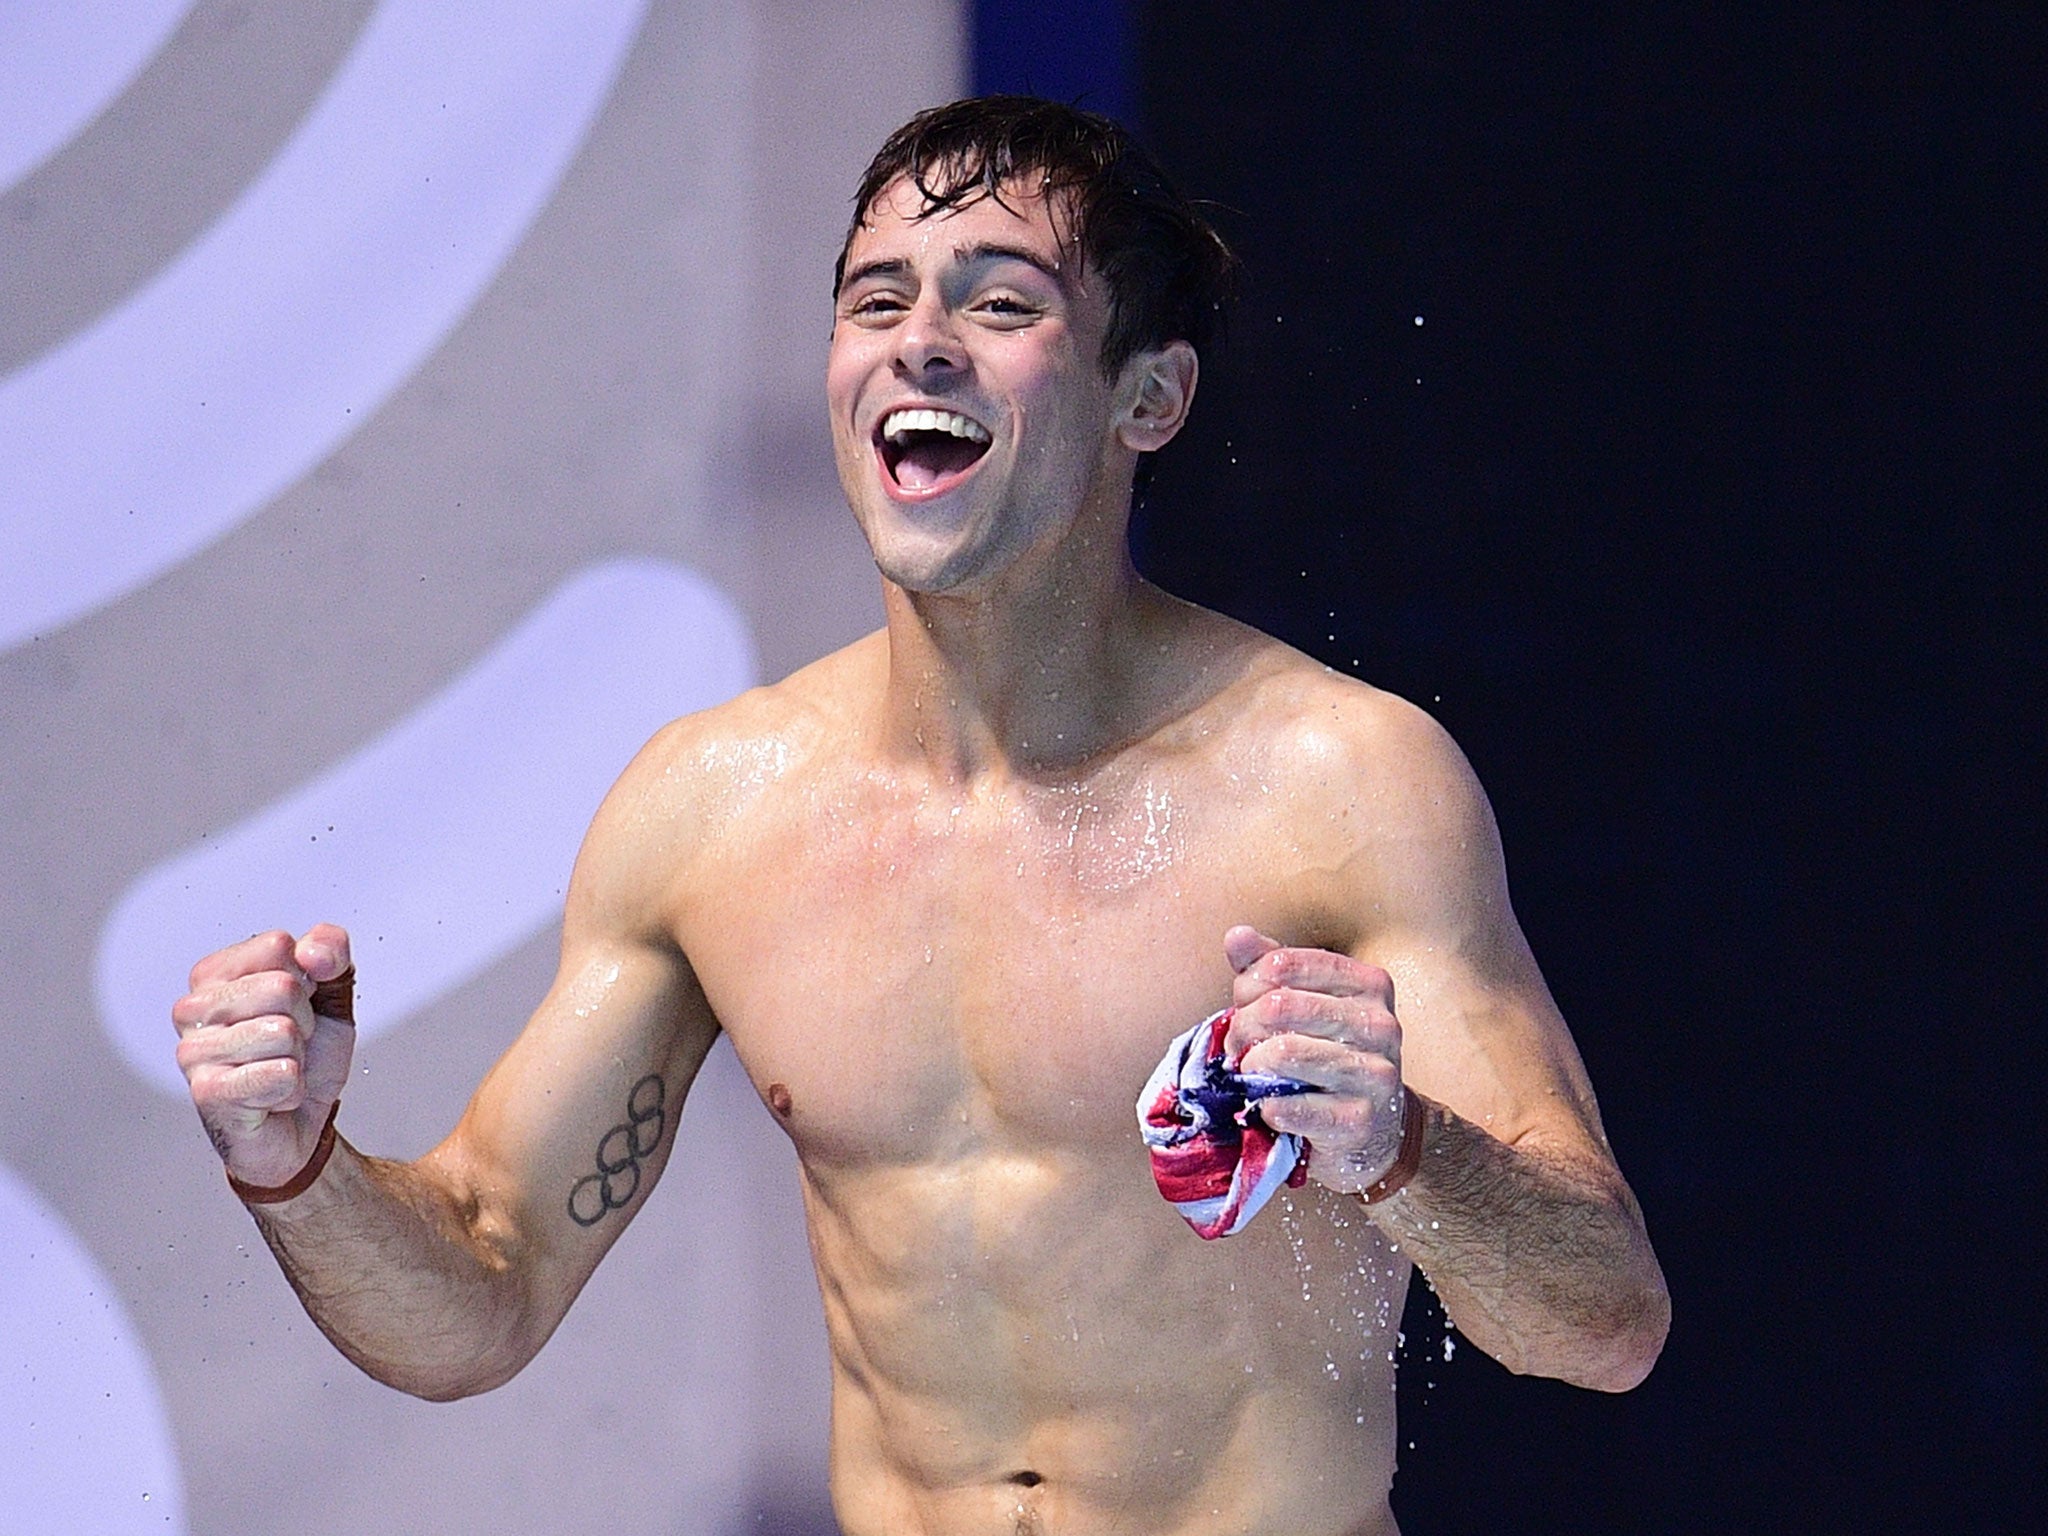 Tom Daley has been part of Britain's sporting landscape for the last 10 years now